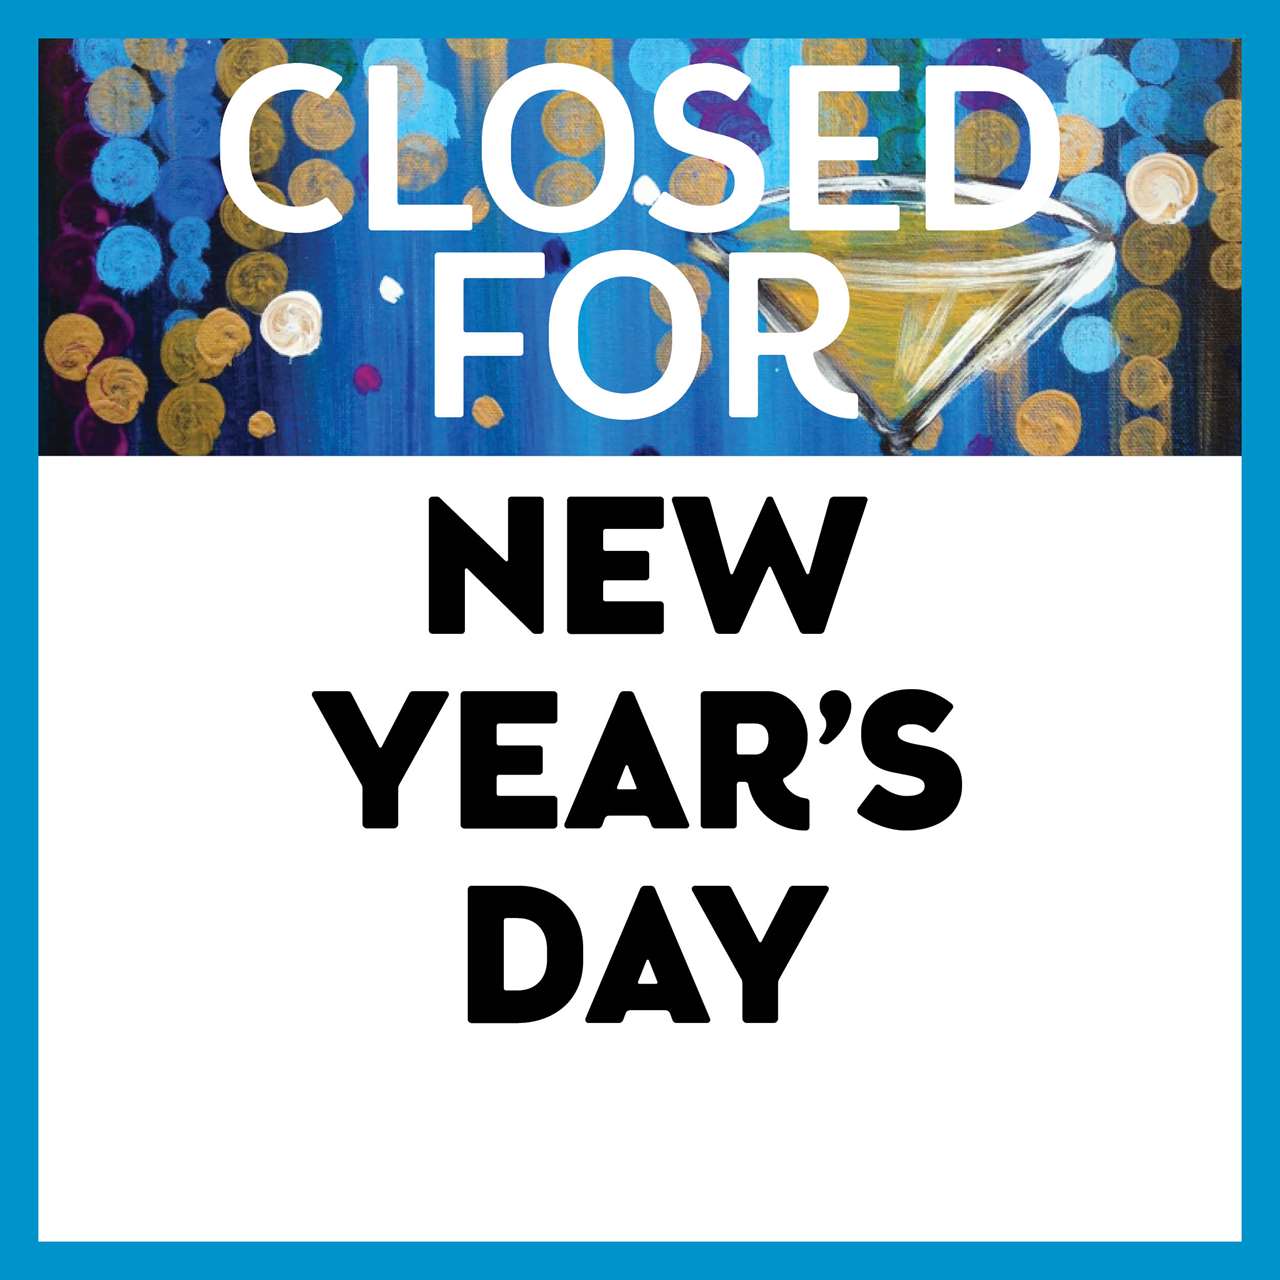 closed-for-new-year-s-day-wed-jan-01-12am-at-brandon